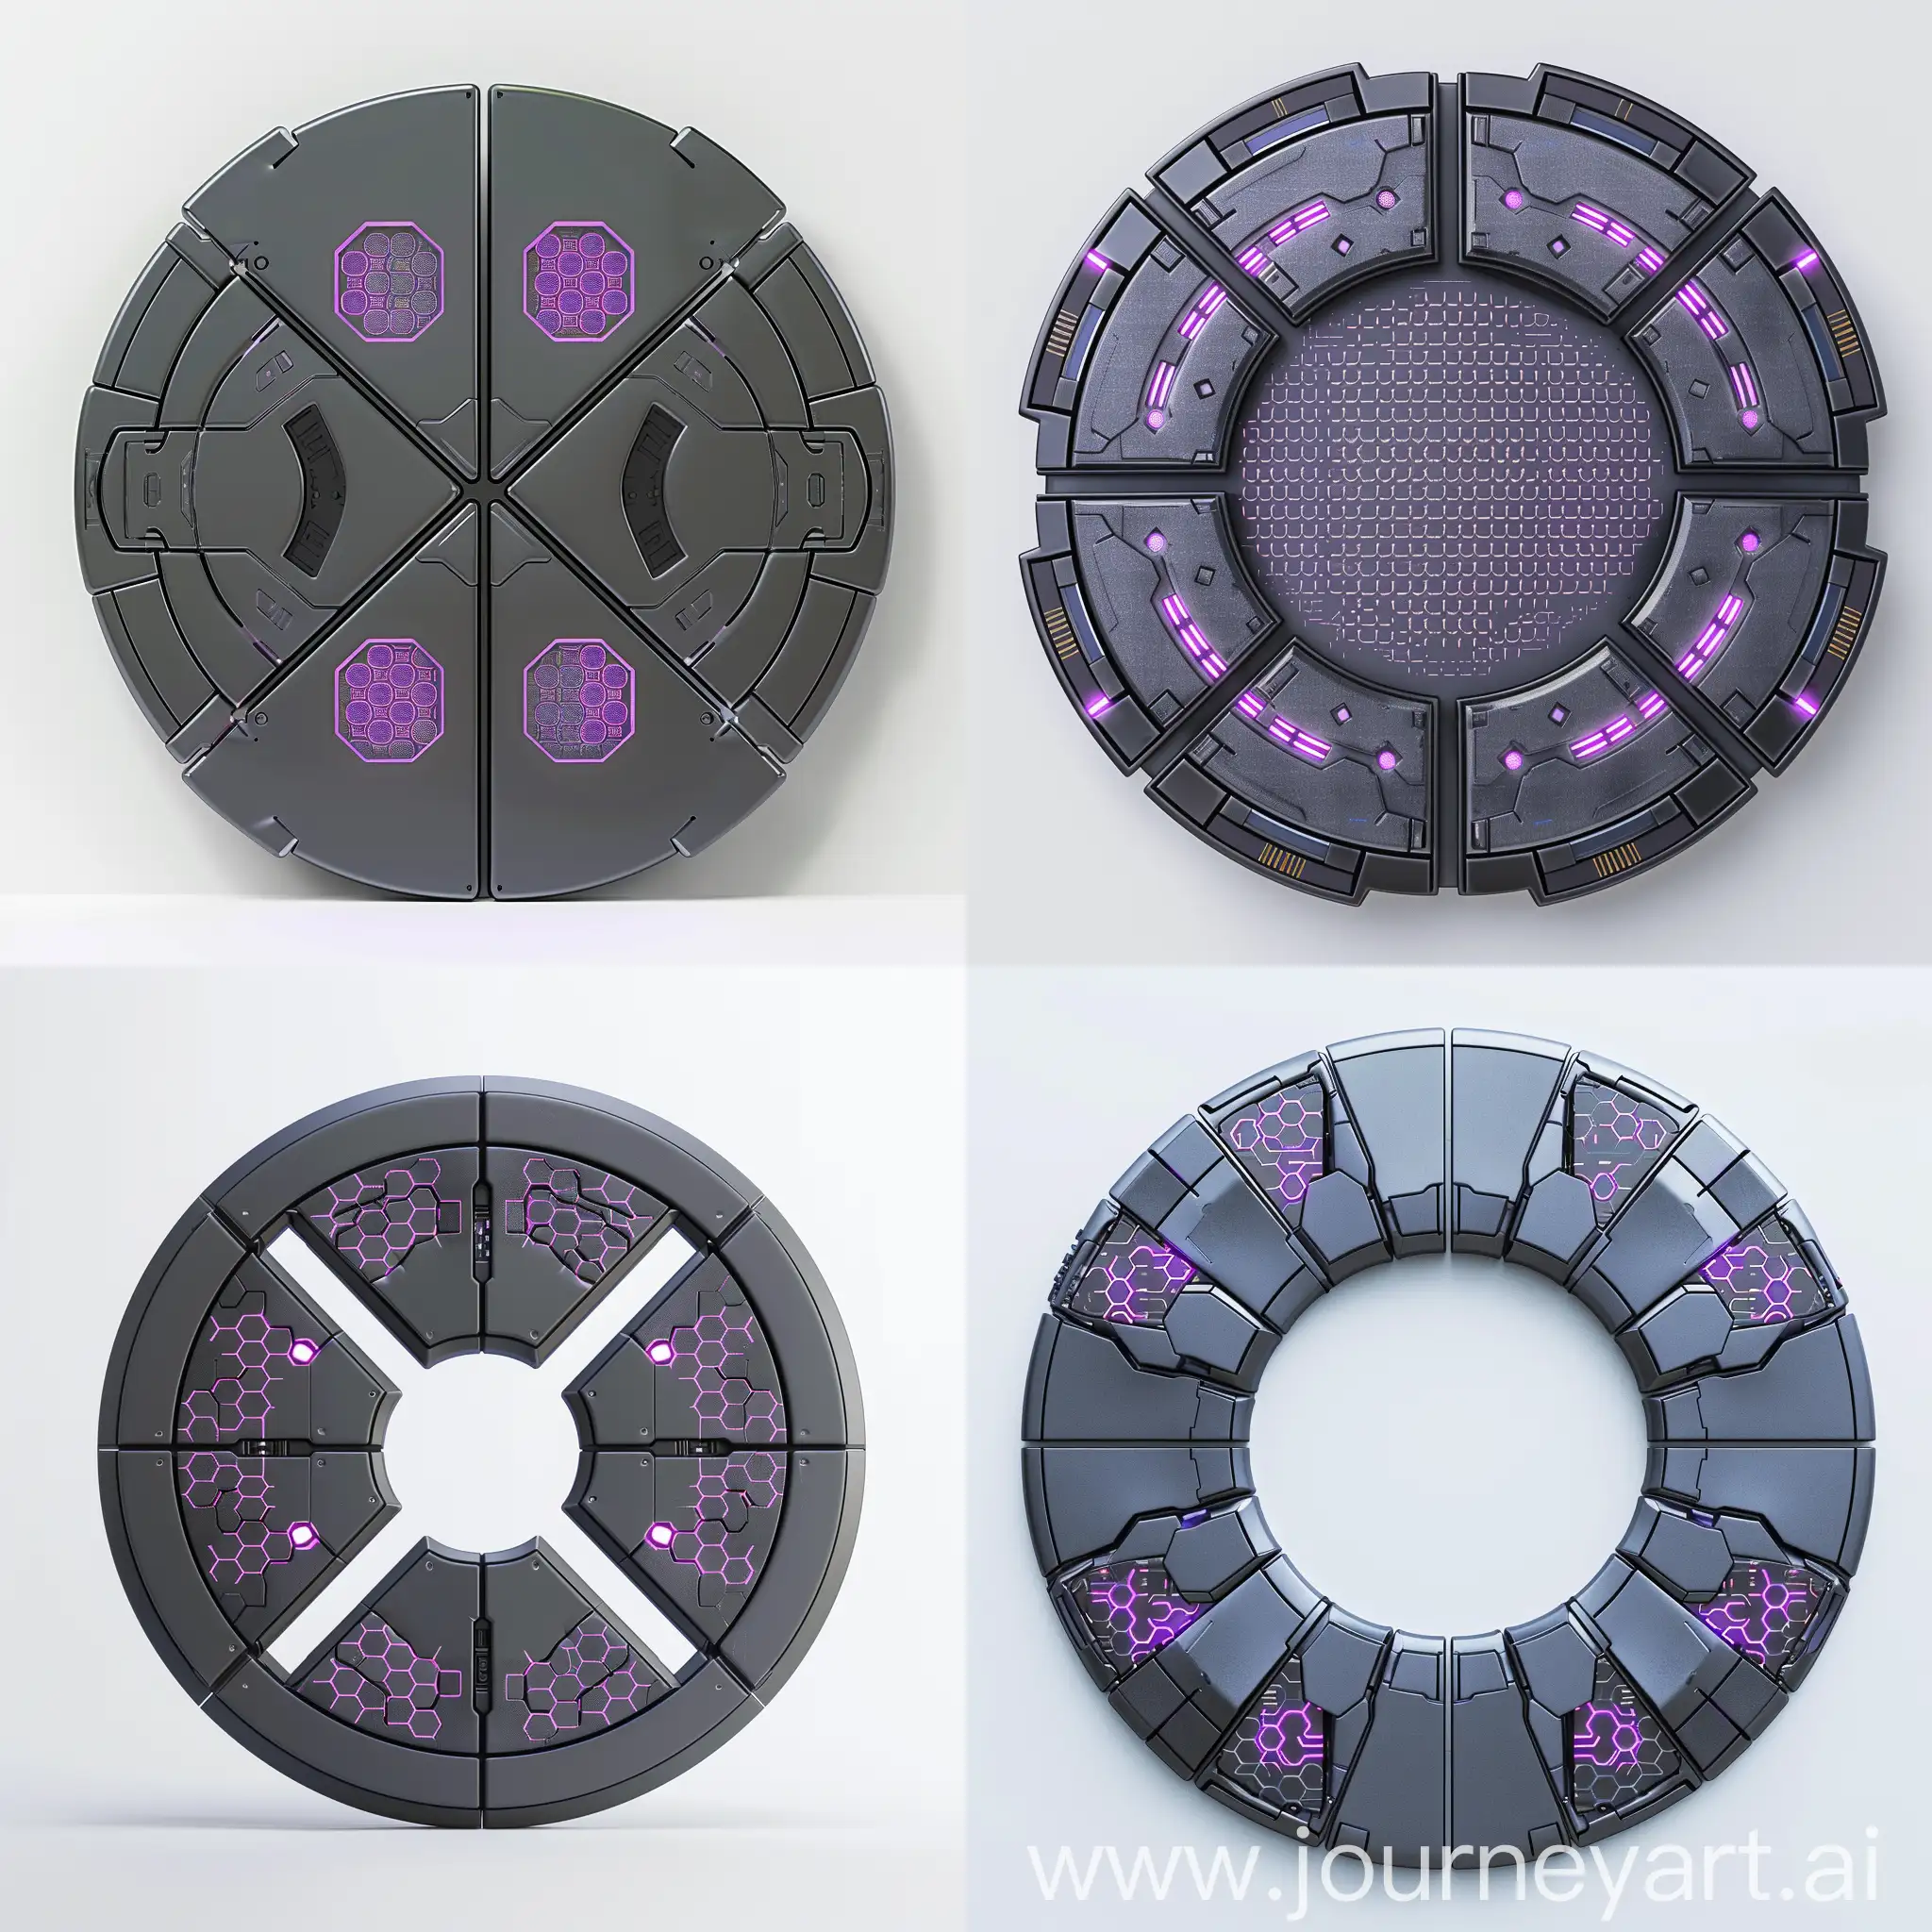 Front view of a circular shield consisting of 4 separate pieces, each with distinct spaces between them resembling a '+' shape when adjacently placed. The shield is crafted from a sleek cyberpunk robotic material in shades of dark gray and light gray. Neon purple hexagon patterns adorn specific areas of the shield, adding a futuristic touch. The background is a clean, white canvas to facilitate easy removal for isolation purposes when editing